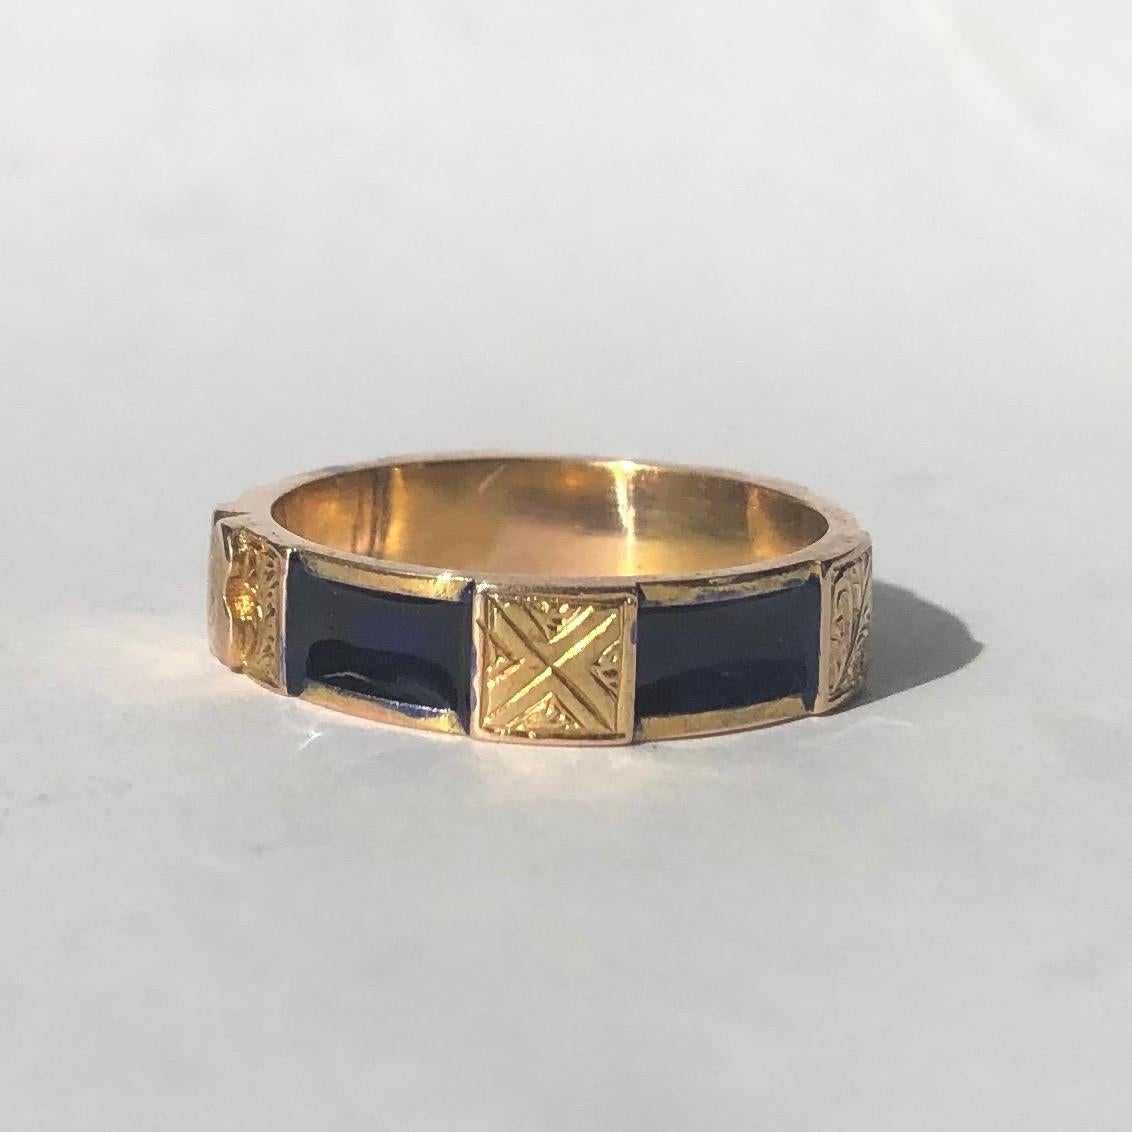 This superb antique Victorian ring is embossed with a fine shield motif at its front, and around the band there are engraved squares between immaculate sections of dark blue enamel. Modelled in 9 carat yellow gold. 

Ring Size: P 1/2 or 8
Band